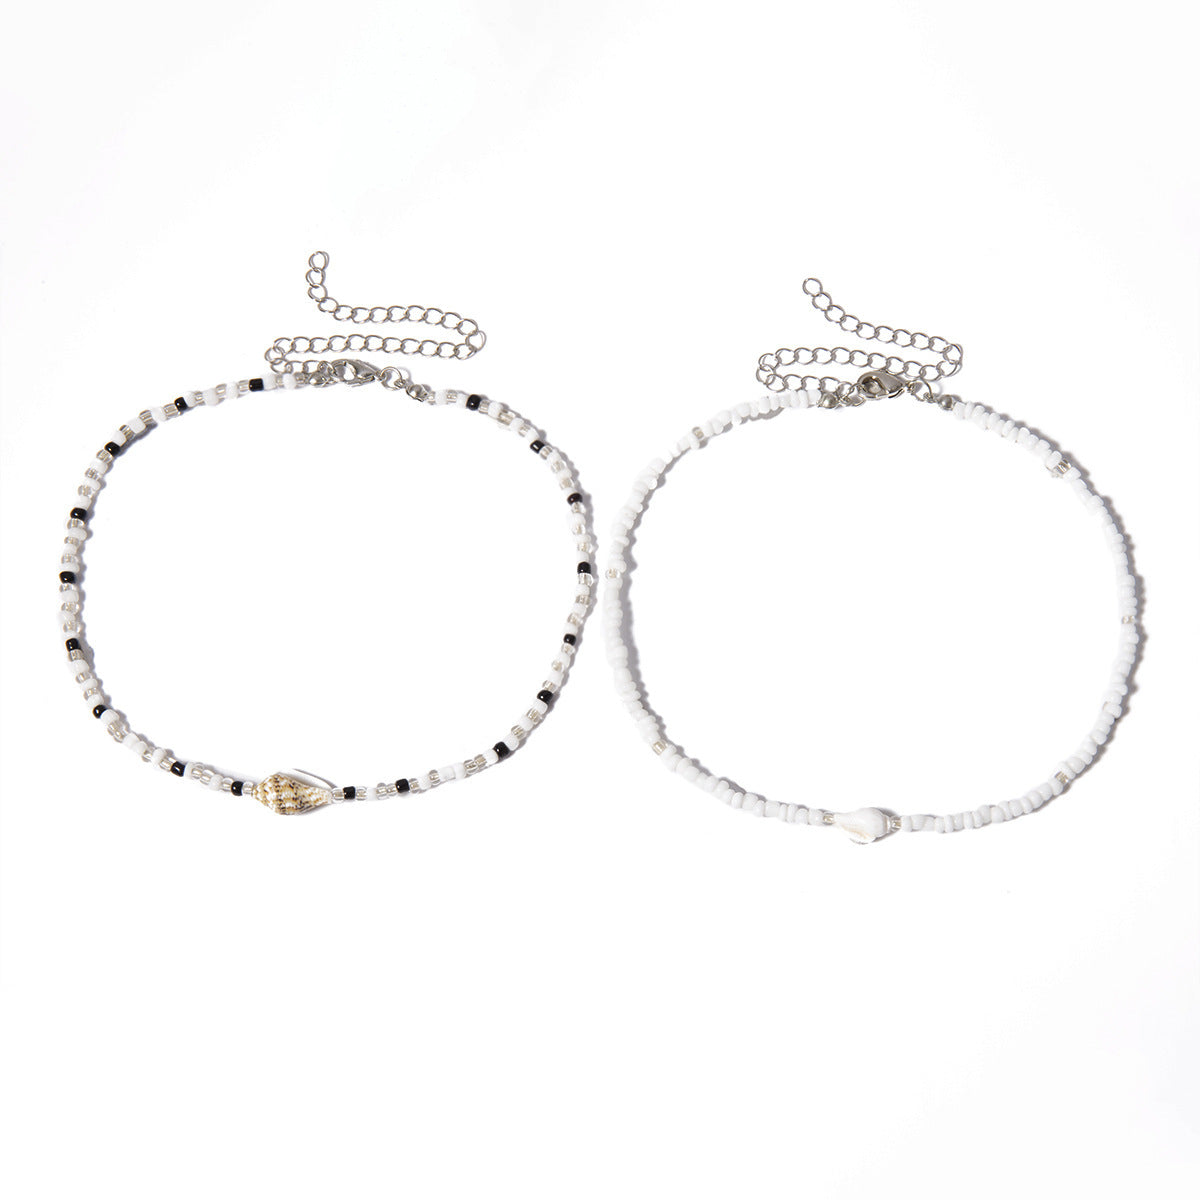 Gorgeous 2-Piece Guipure Decor Necklace Set - Perfect for Holiday Style!